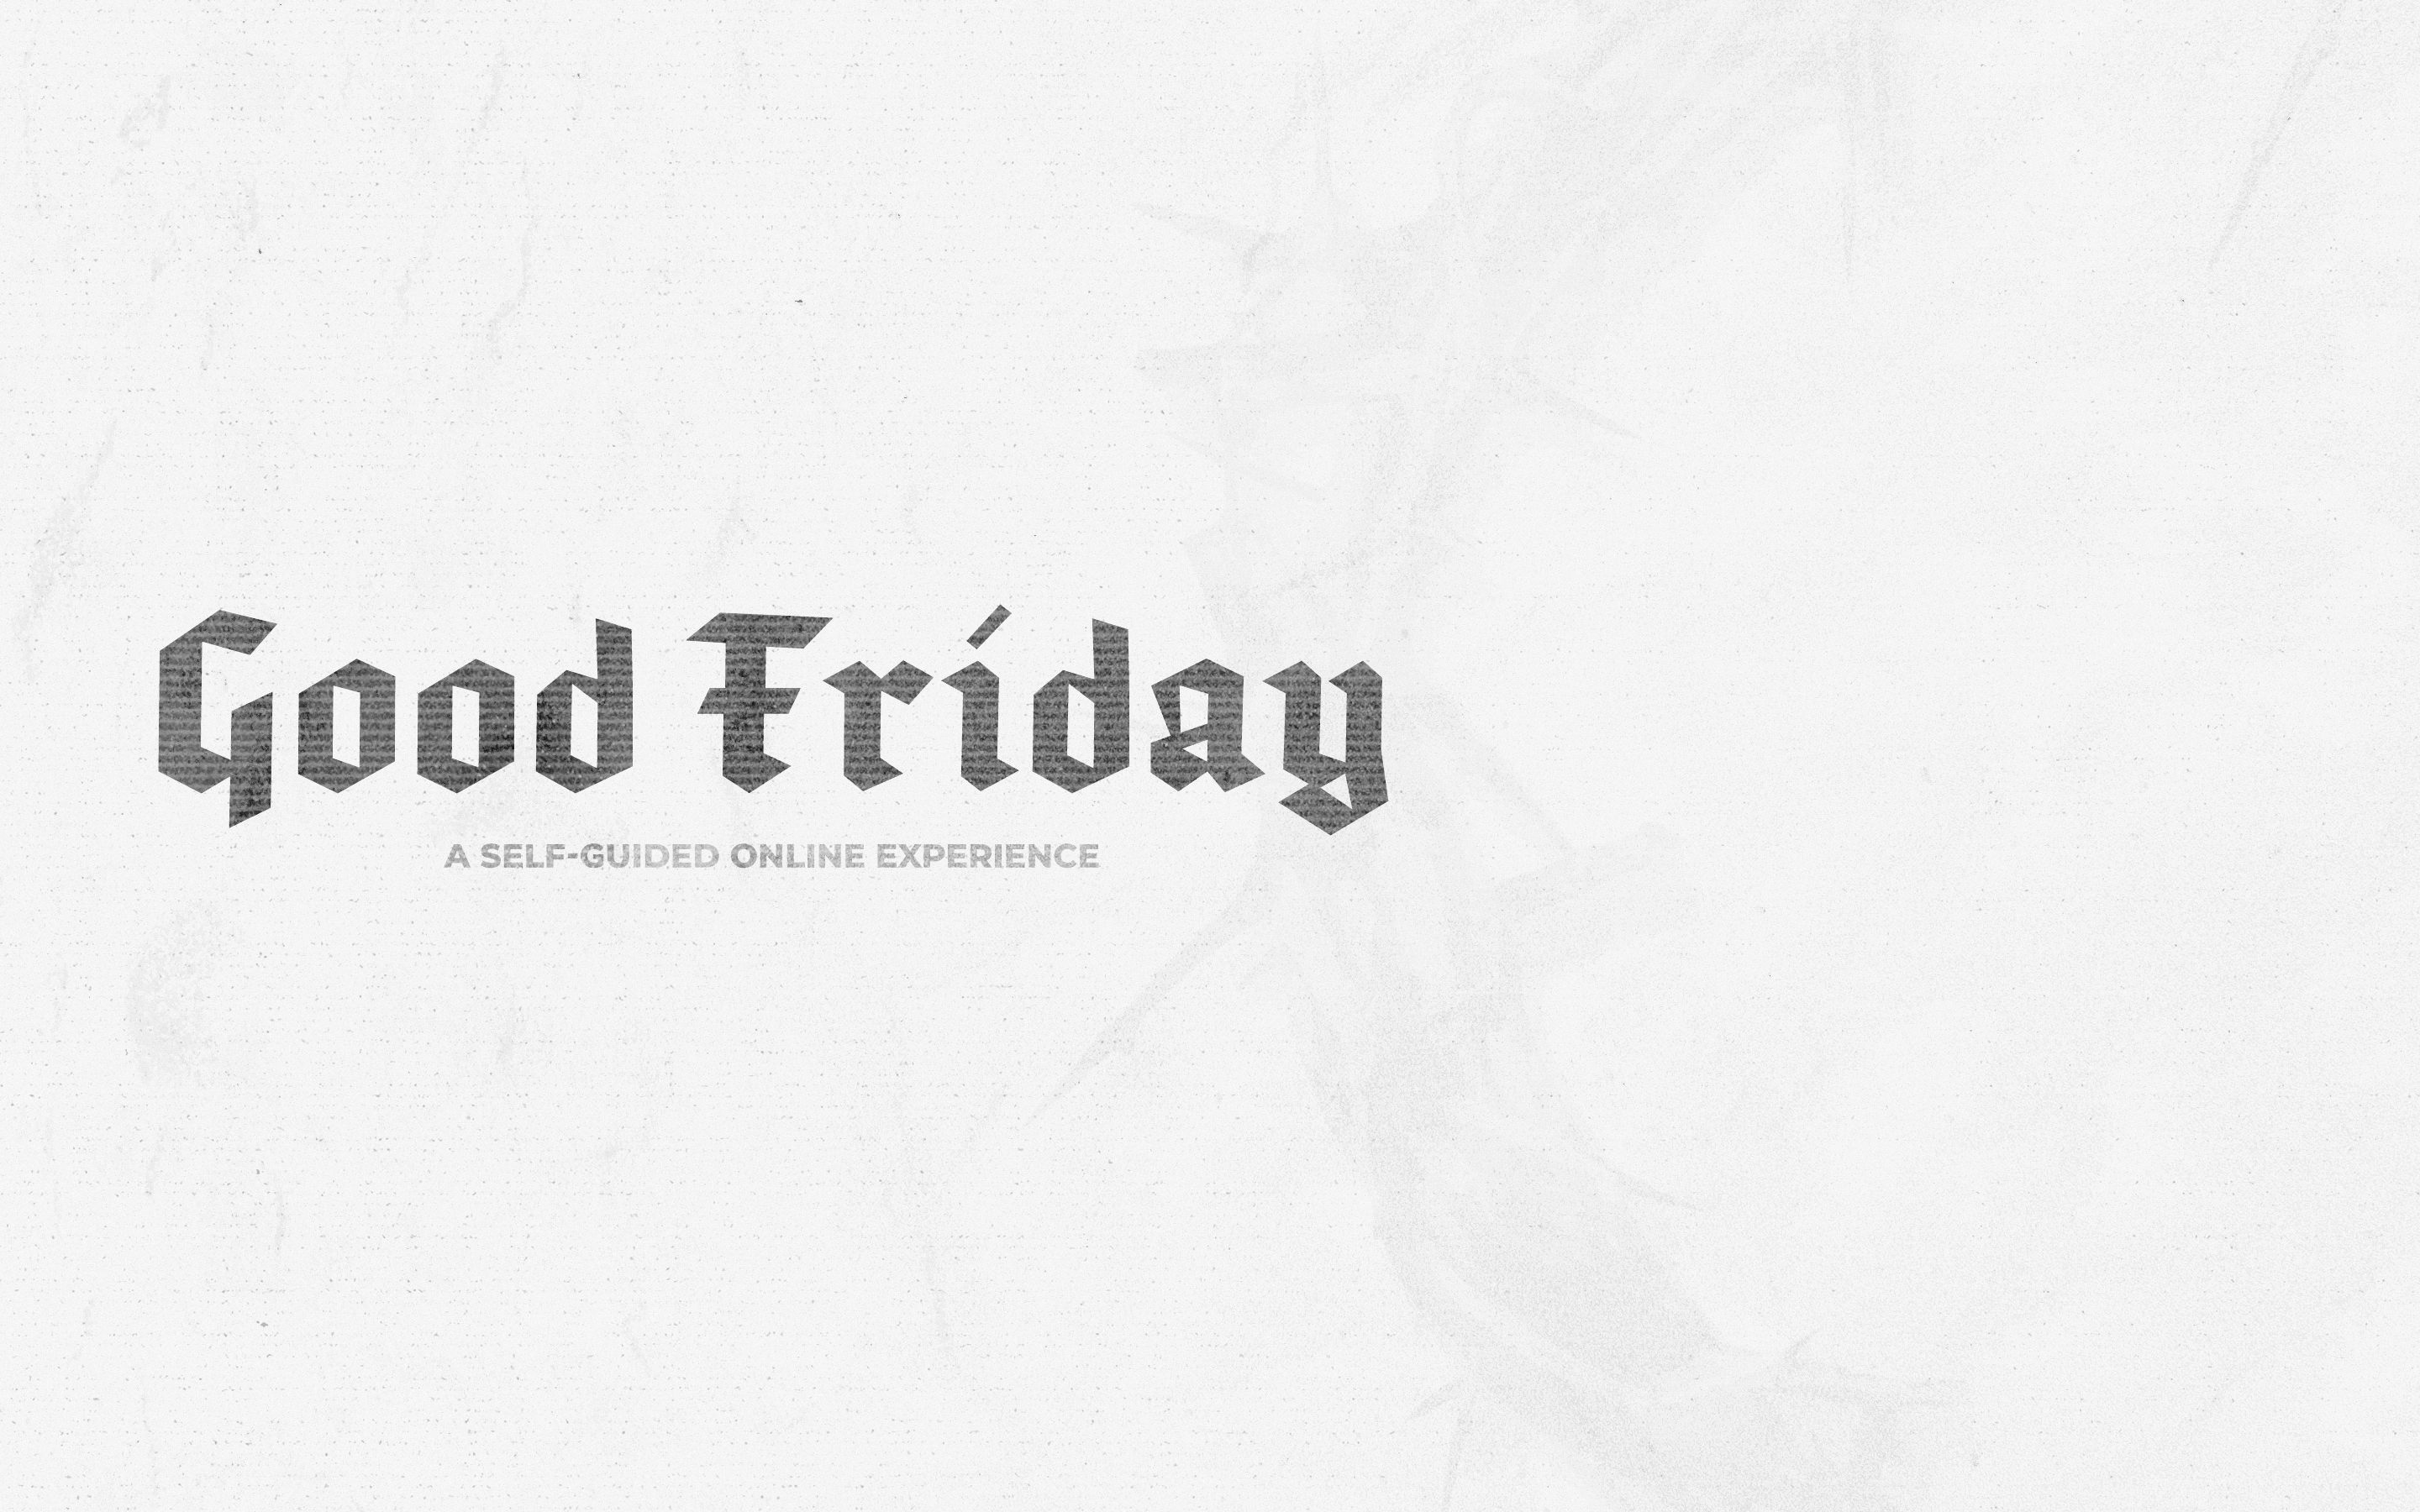 Image: Good Friday Experience